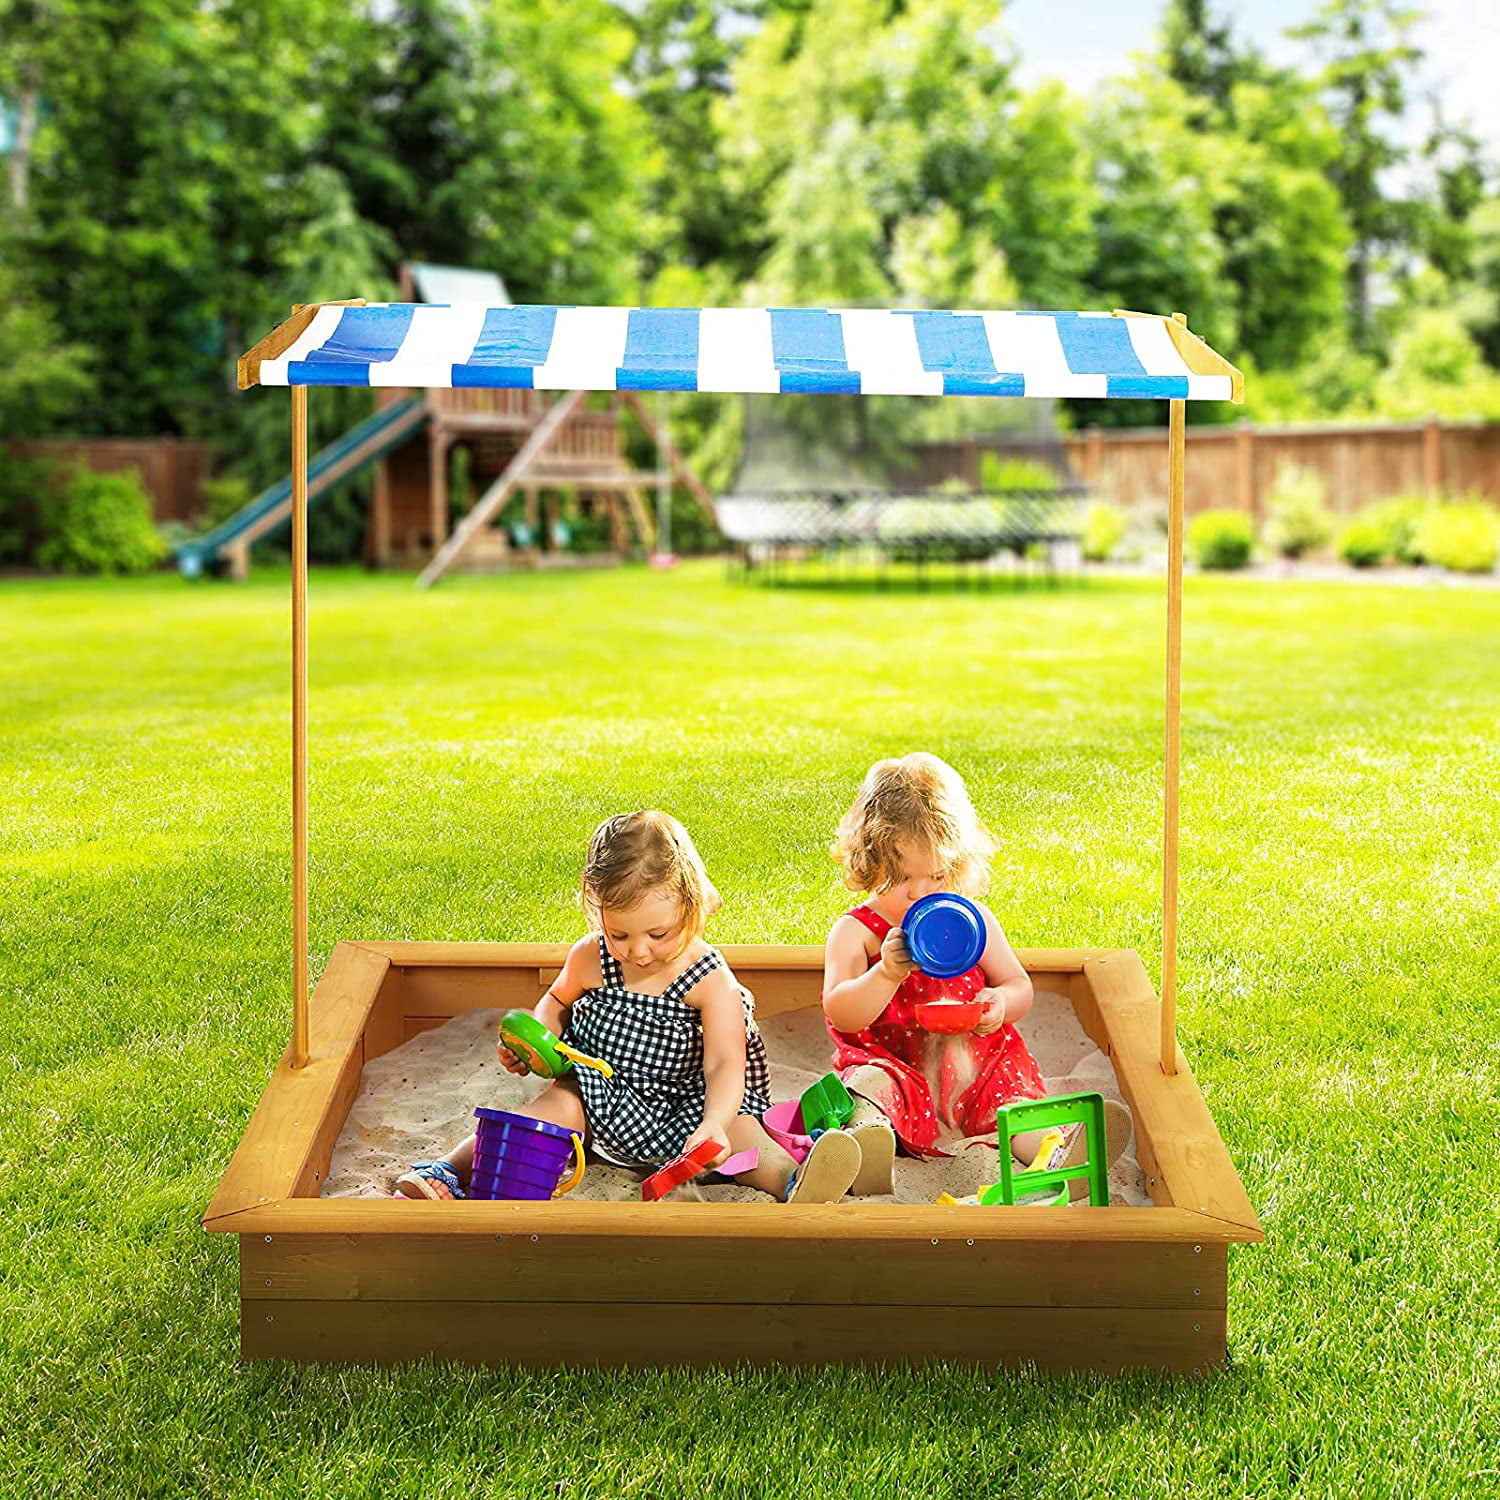 Sandbox for Kids with Cover Outdoor Backyard Wooden Playset Beach Activity Toy 